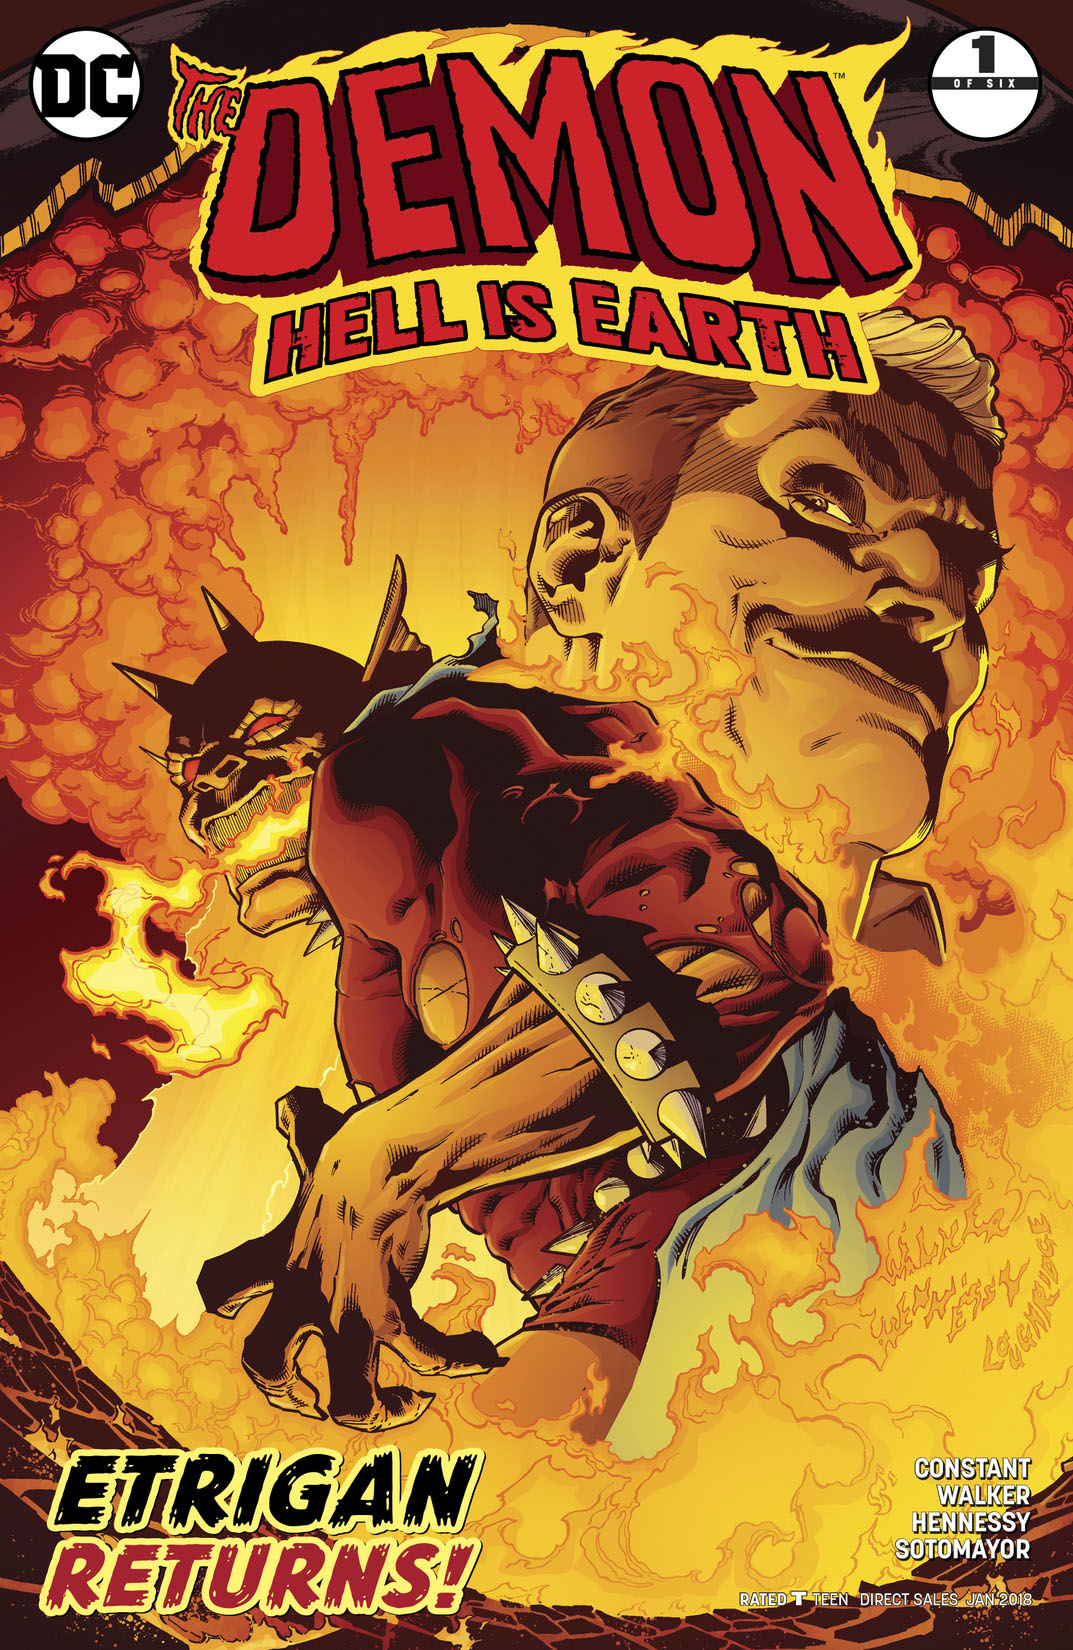 The Demon: Hell is Earth #1 preview images